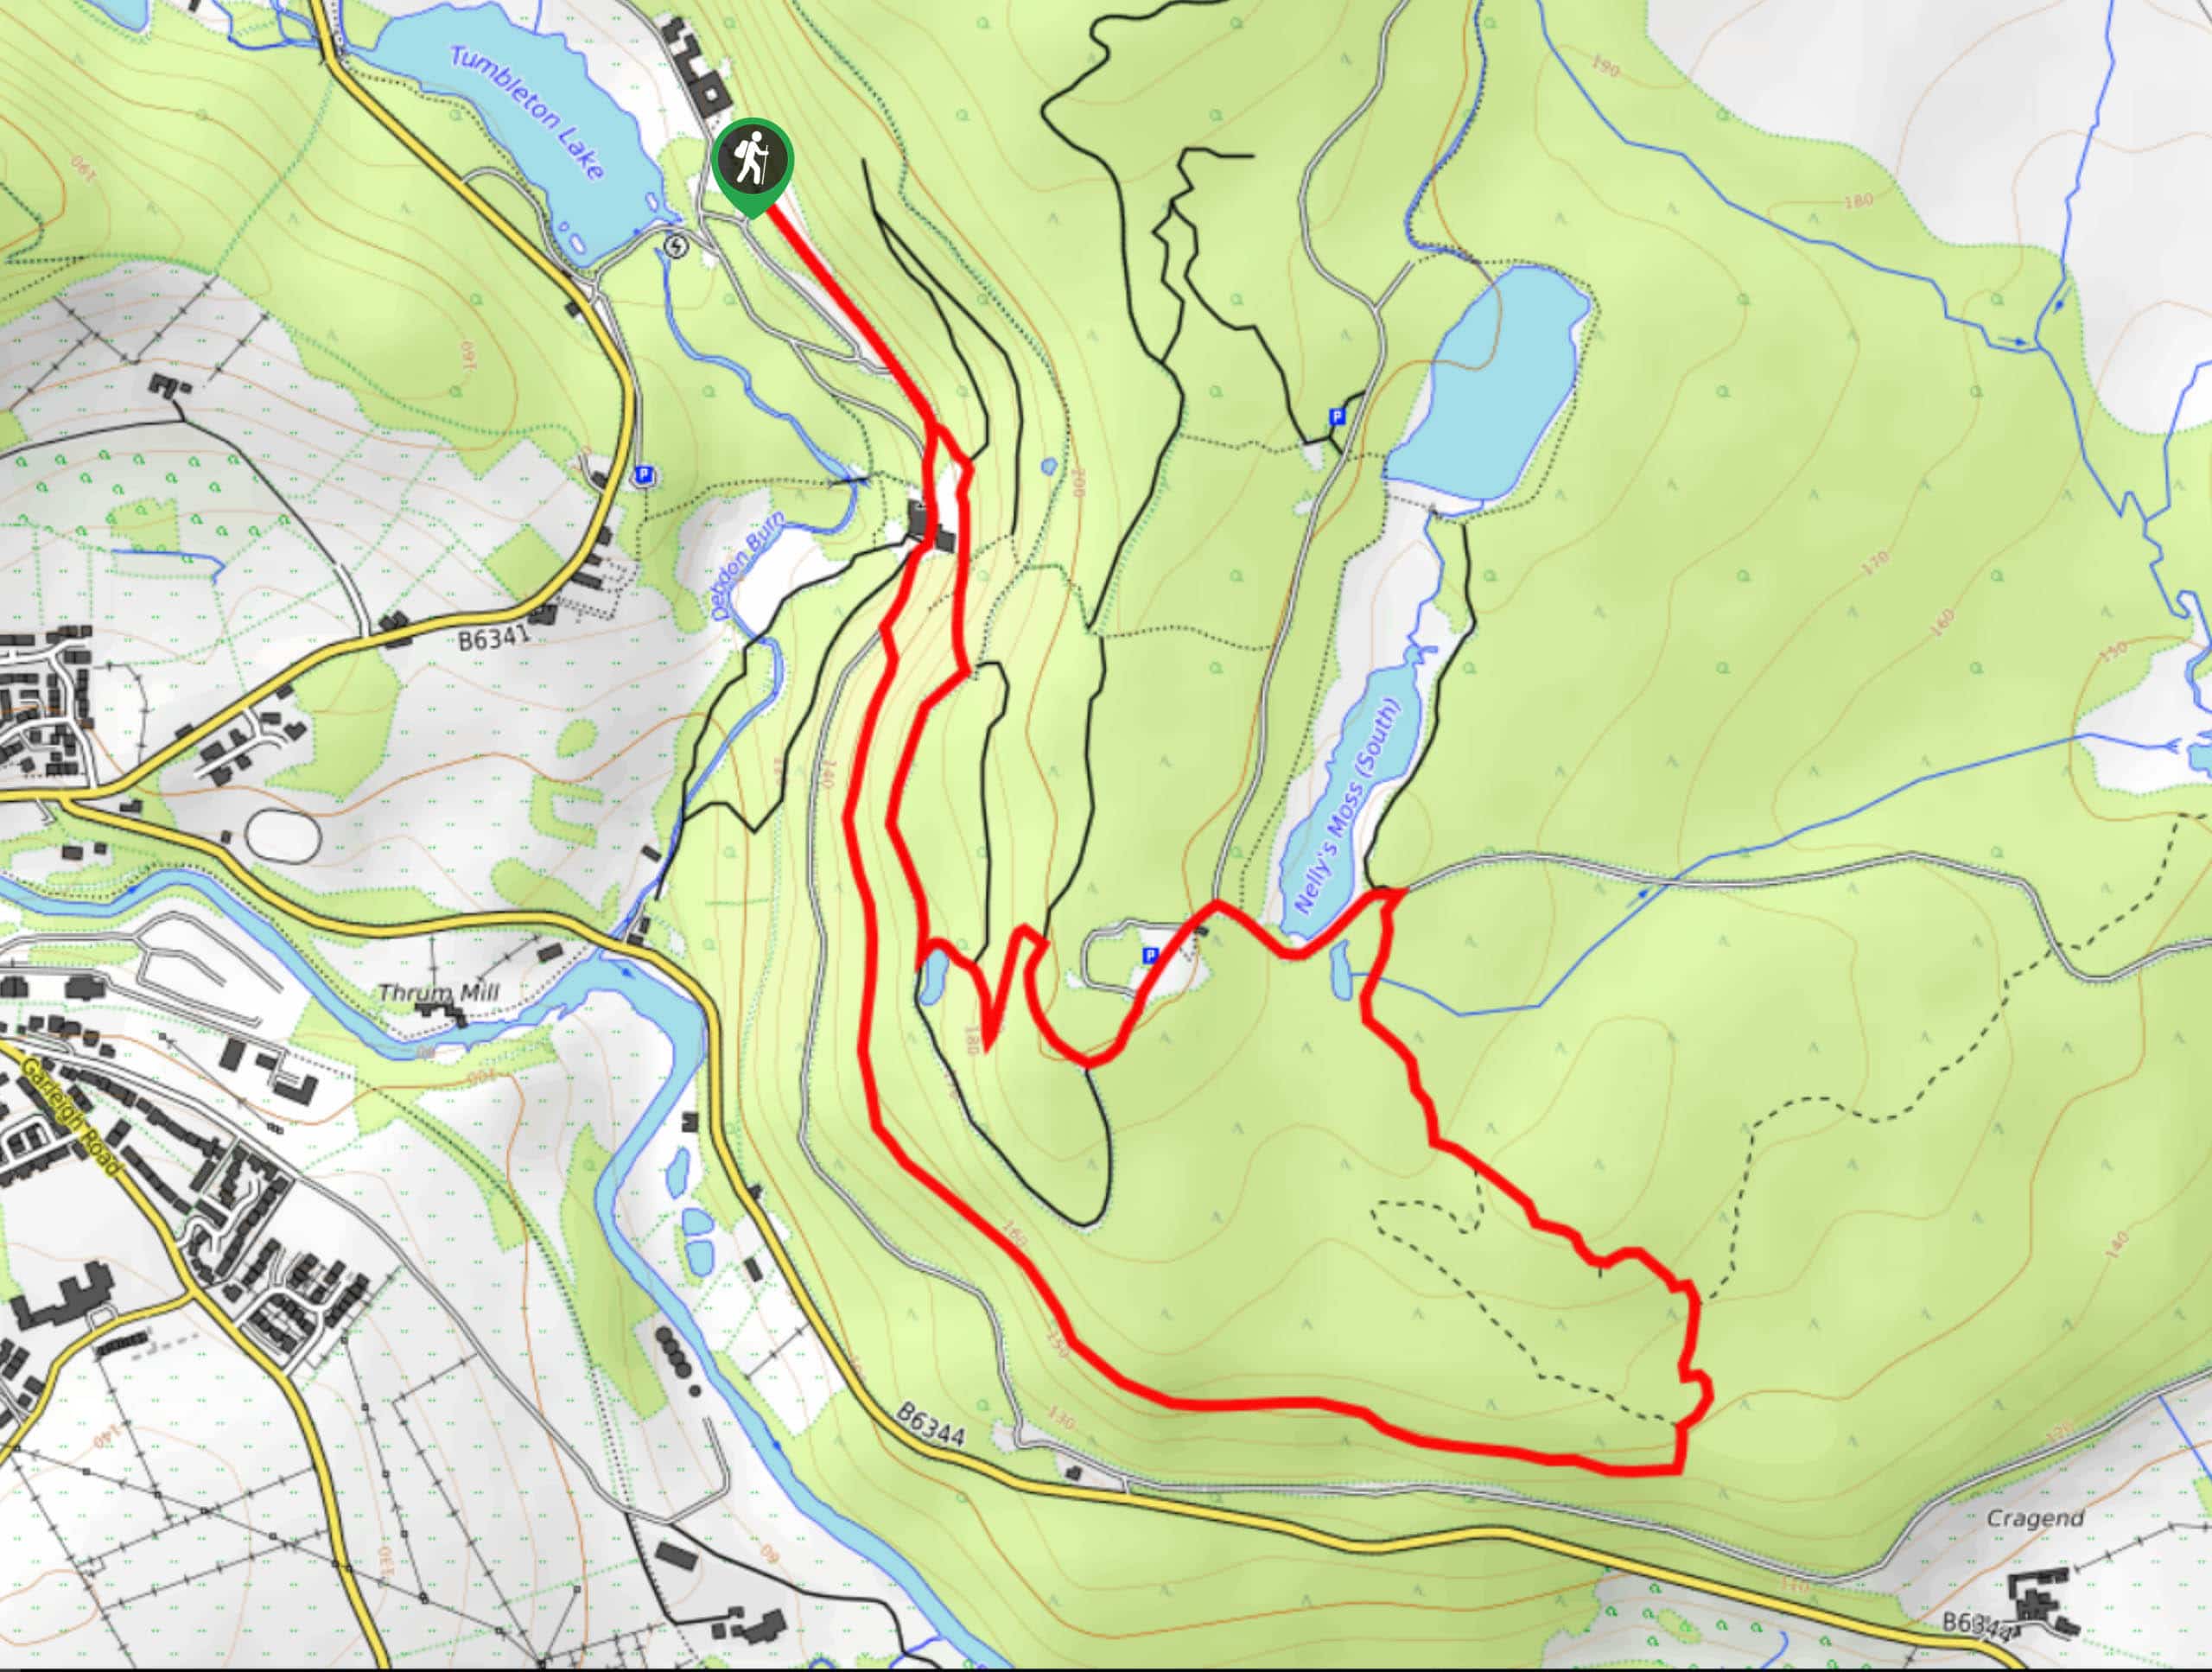 Nelly’s Moss and Cragside Circular Walk Map